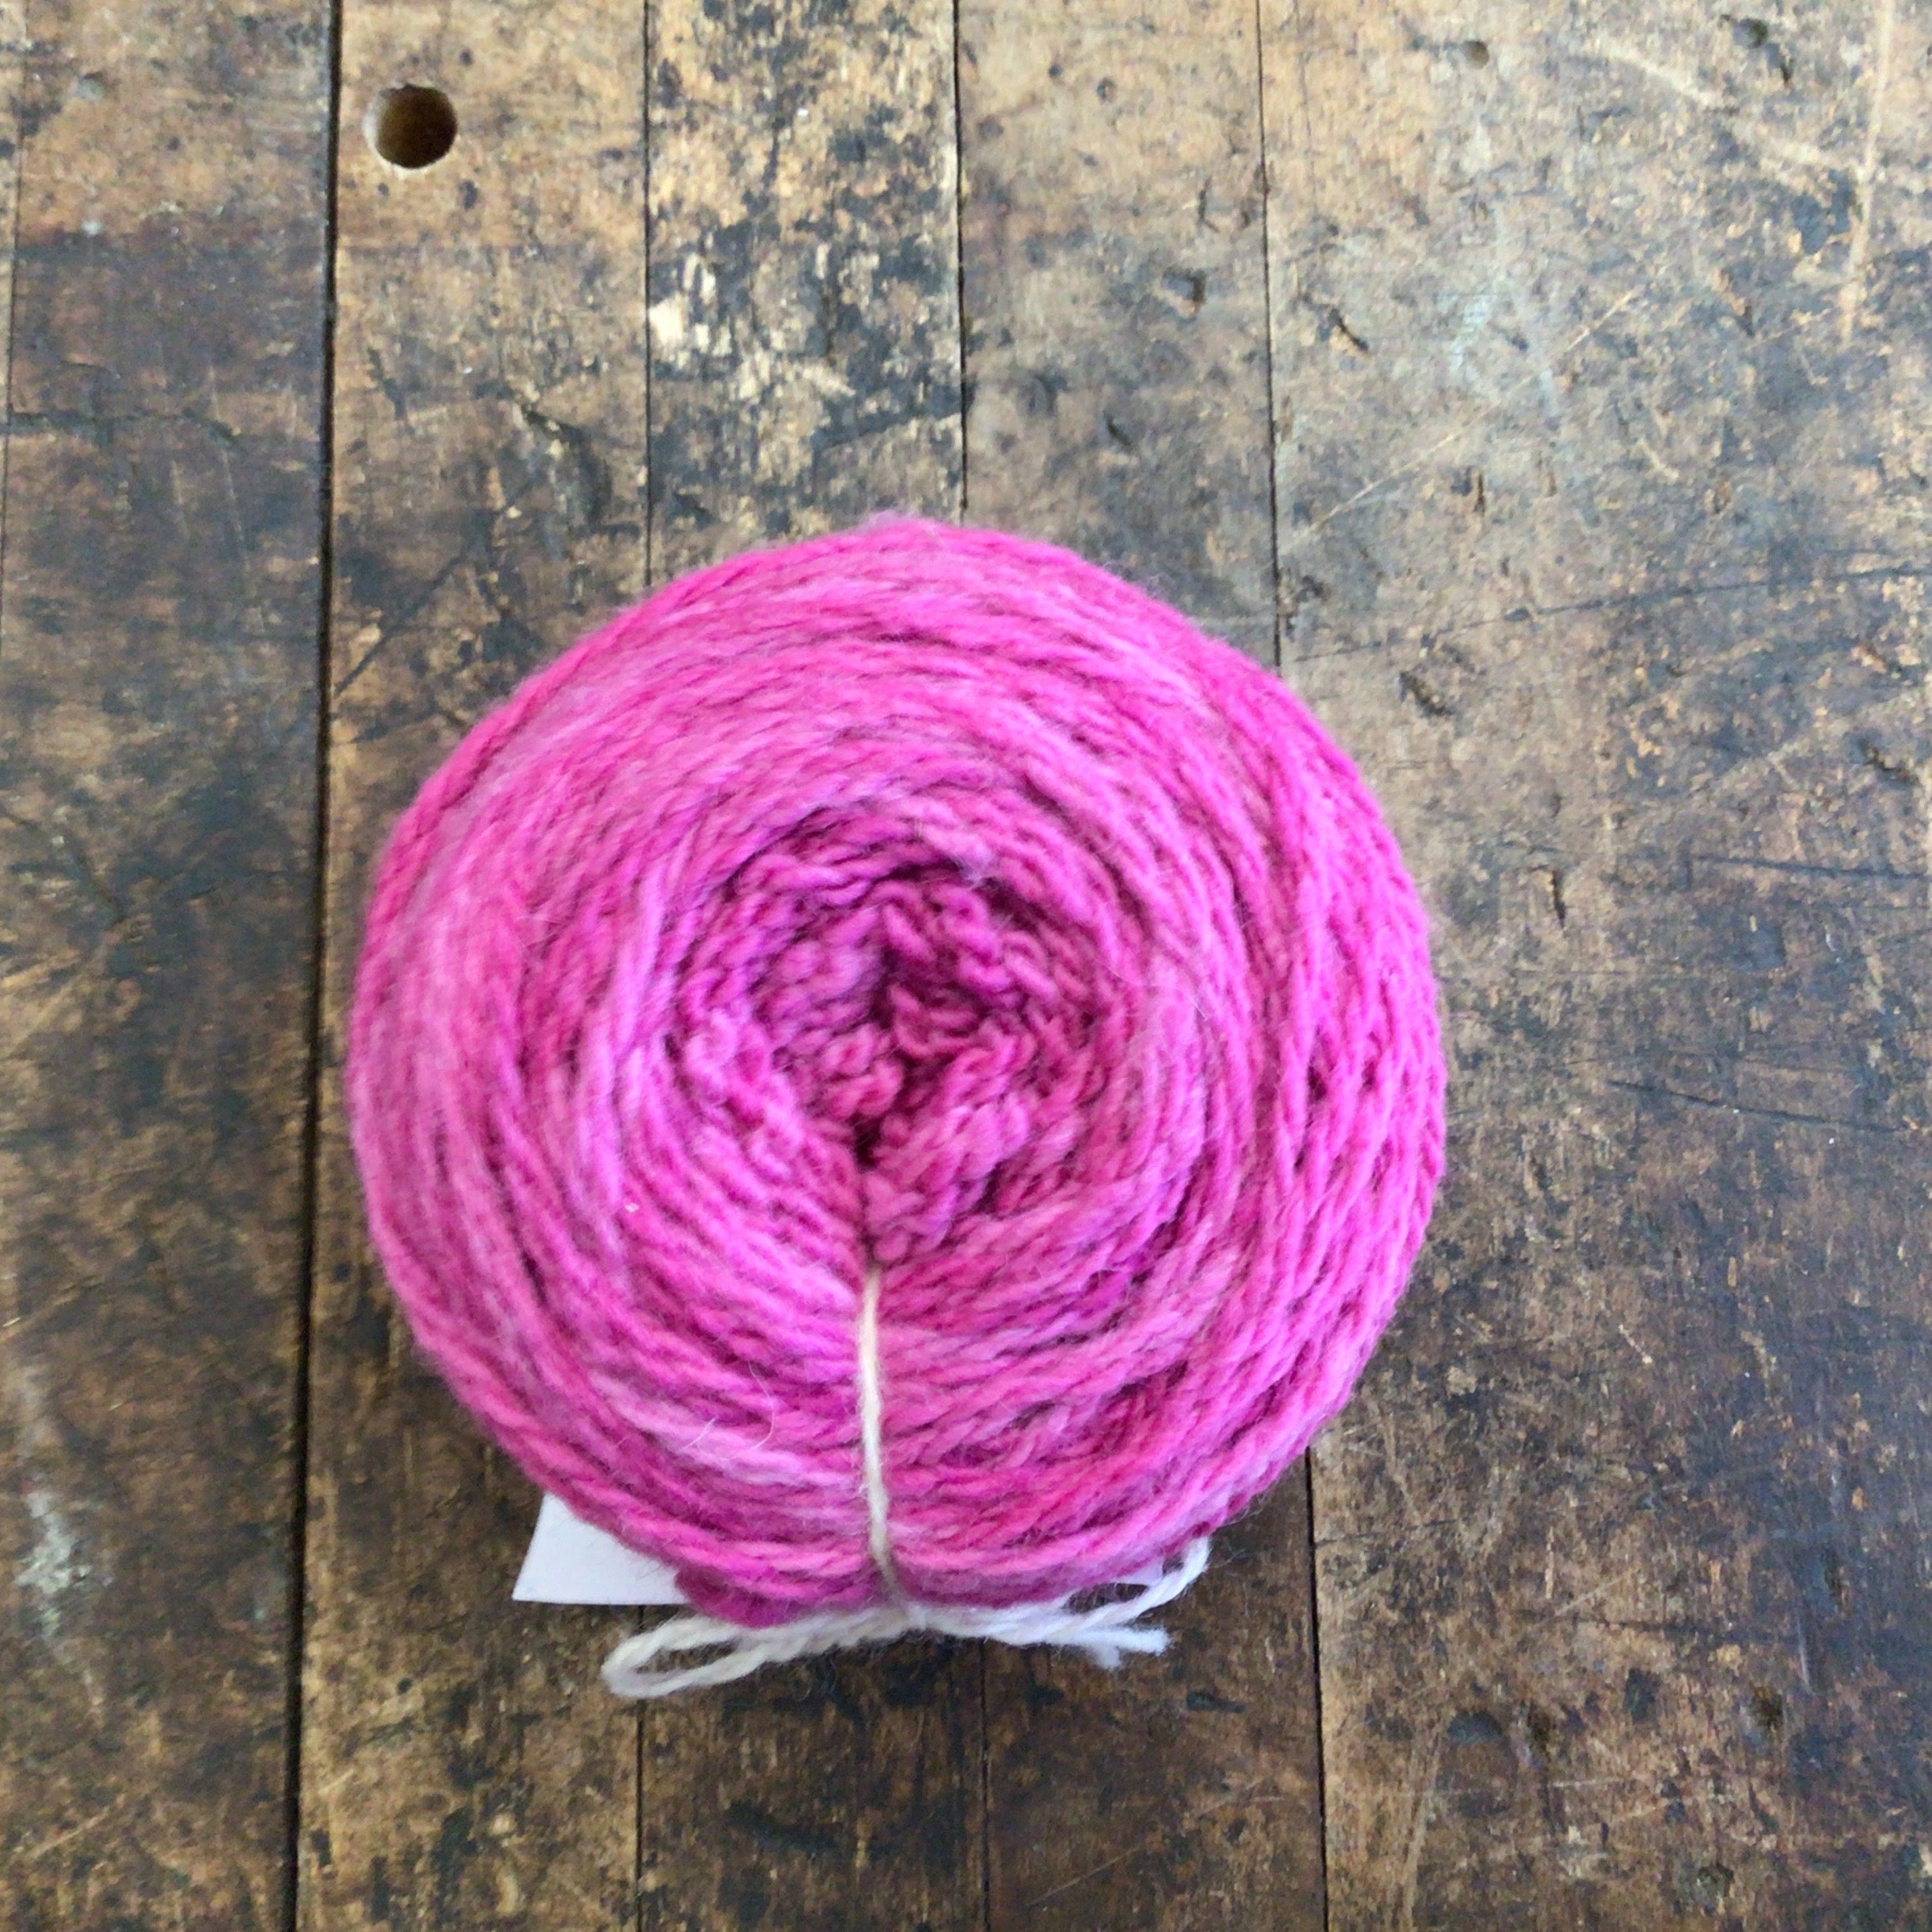 Tronstad Ranch Hand Rambouillet 2 Ply Worsted Weight Yarn - Fuschia